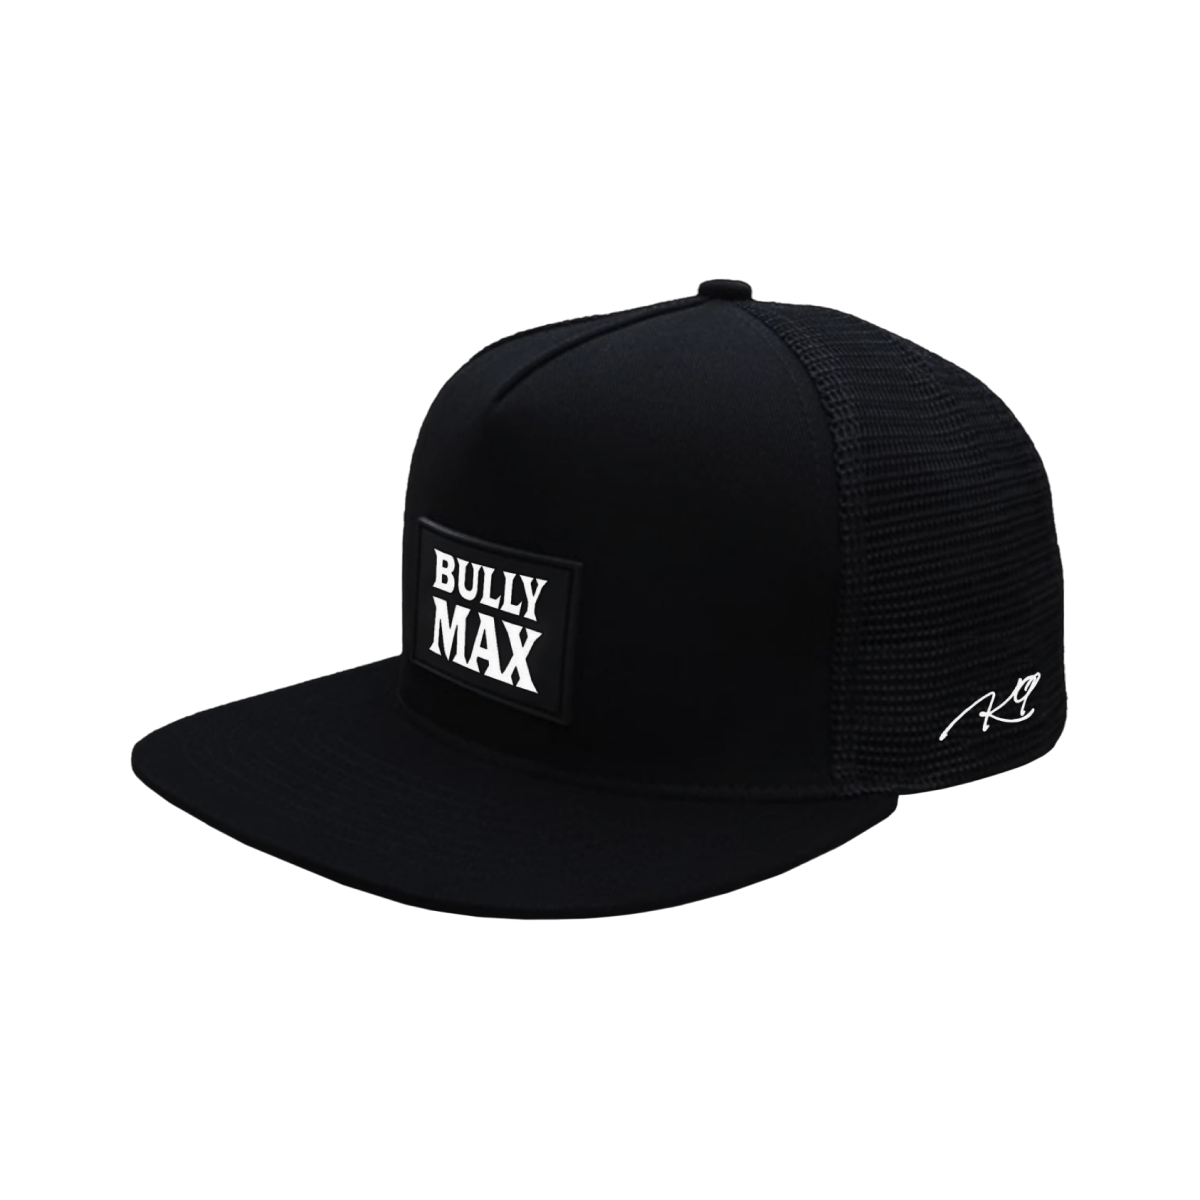 Bully Max Limited Edition K9 Hat